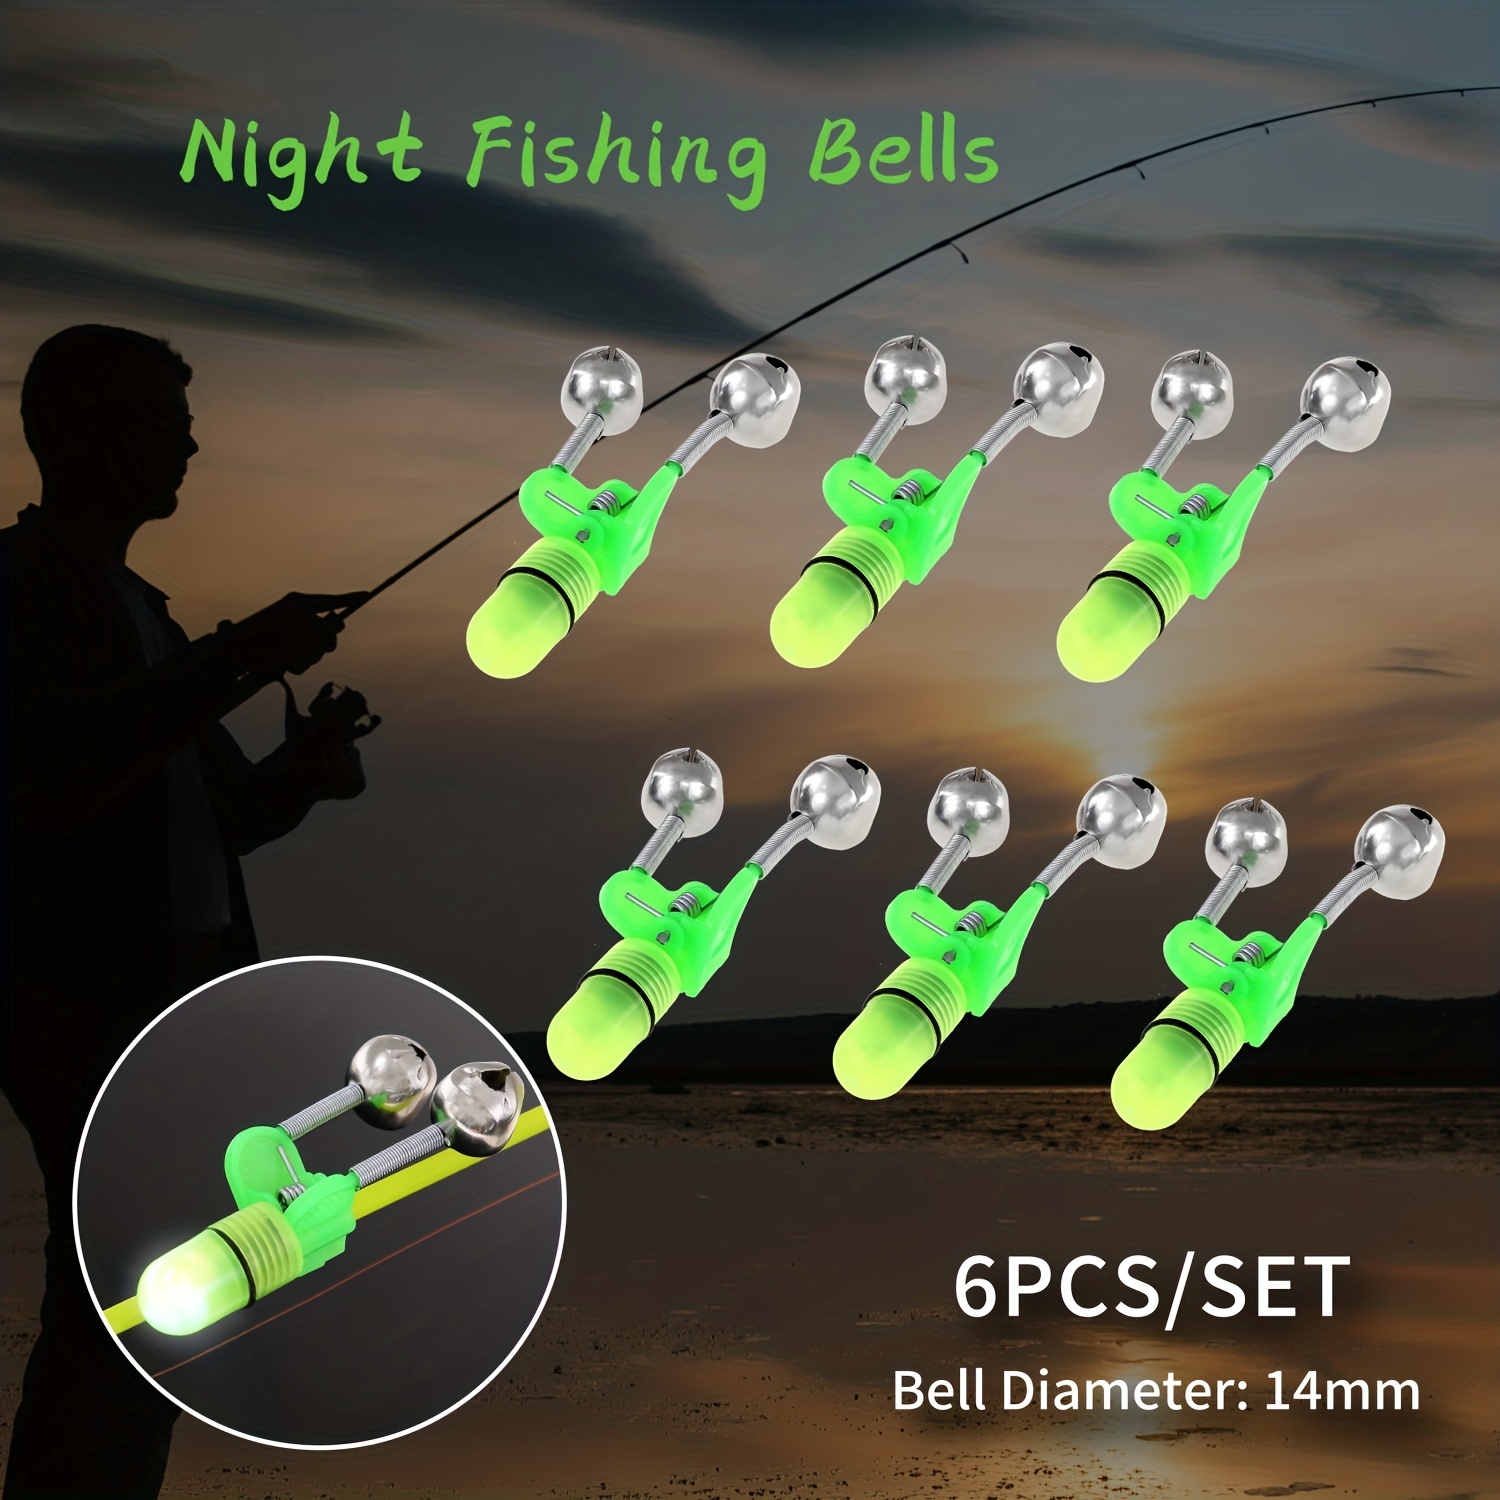 Ochine Best Sensitive Electronic Fishing Bite Alarm Indicator Sound Bite Alarm Bell with LED Lights Fishing Bells for Rods, Size: One size, Yellow